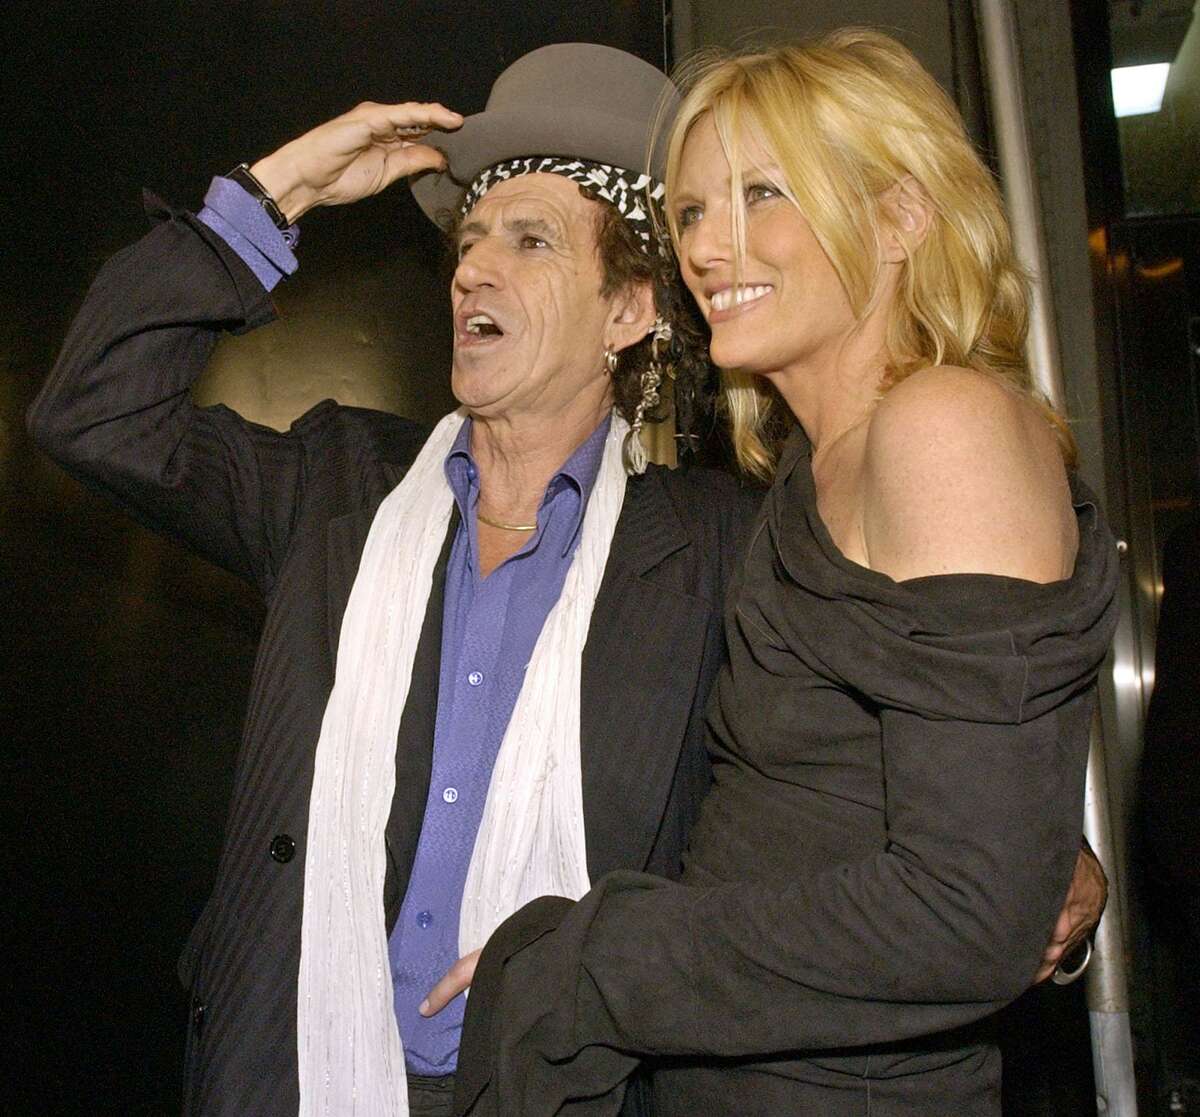 Rolling Stones' guitarist Keith Richards, left, arrives with his wife Patti Hansen at the launch party of the four DVD collection "Four Licks" Wednesday, Oct. 29, 2003 in New York.The legendary Rolling Stones guitarist and his wife, Patti Hansen, are donating items from their upper East Side Manhattan apartment to benefit Ridgefield nonprofits — SPHERE and The Prospector Theater — for the work they do with adults who have autism. The connection to the Connecticut nonprofits: Hansen’s 24-year-old-nephew has autism and has received services from the charity organization.